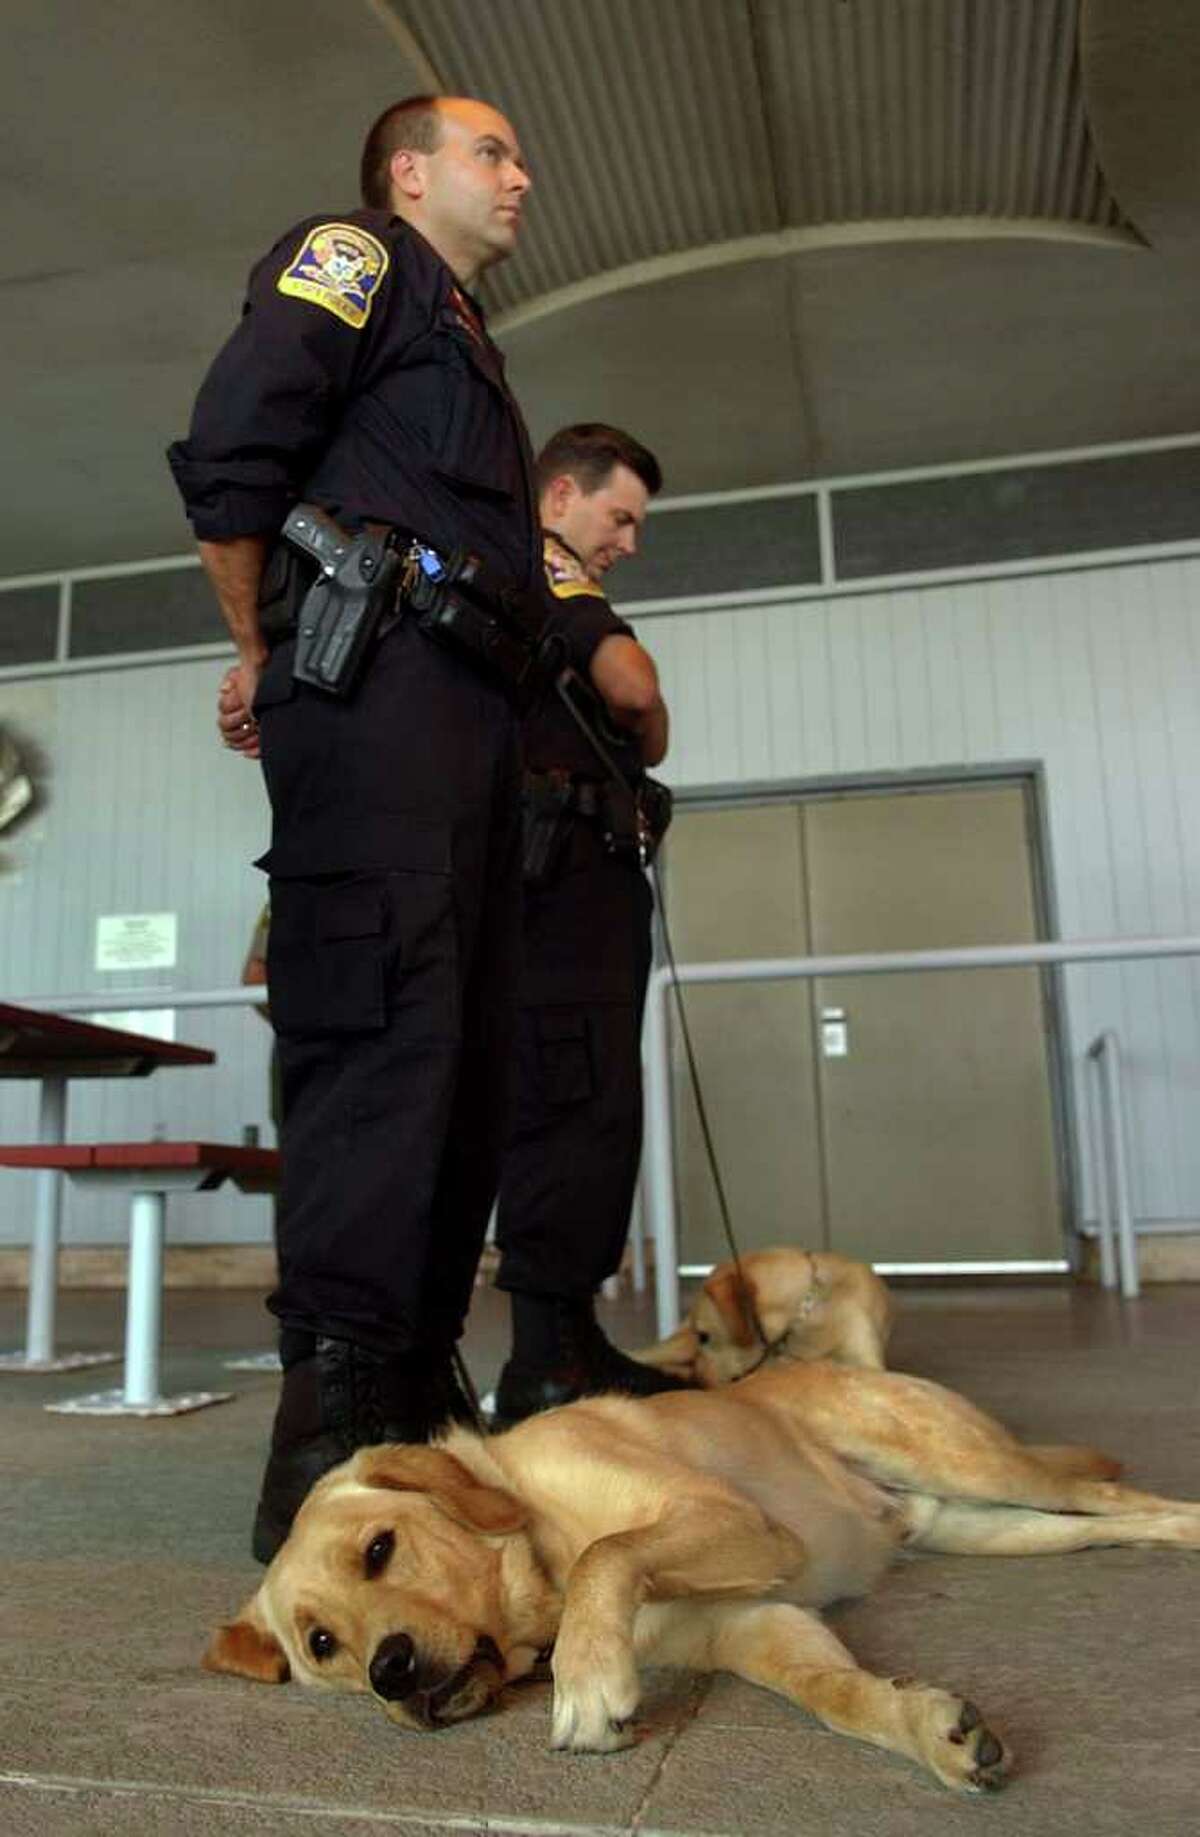 Connecticut State Police K9 Officer Mark Packer stands with his dog Regis, during a Ceremony Honoring Connecticut's 9/11 First Responders and Volunteers at Sherwood Island State Park in Westport, Conn. on Tuesday September 14, 2011.